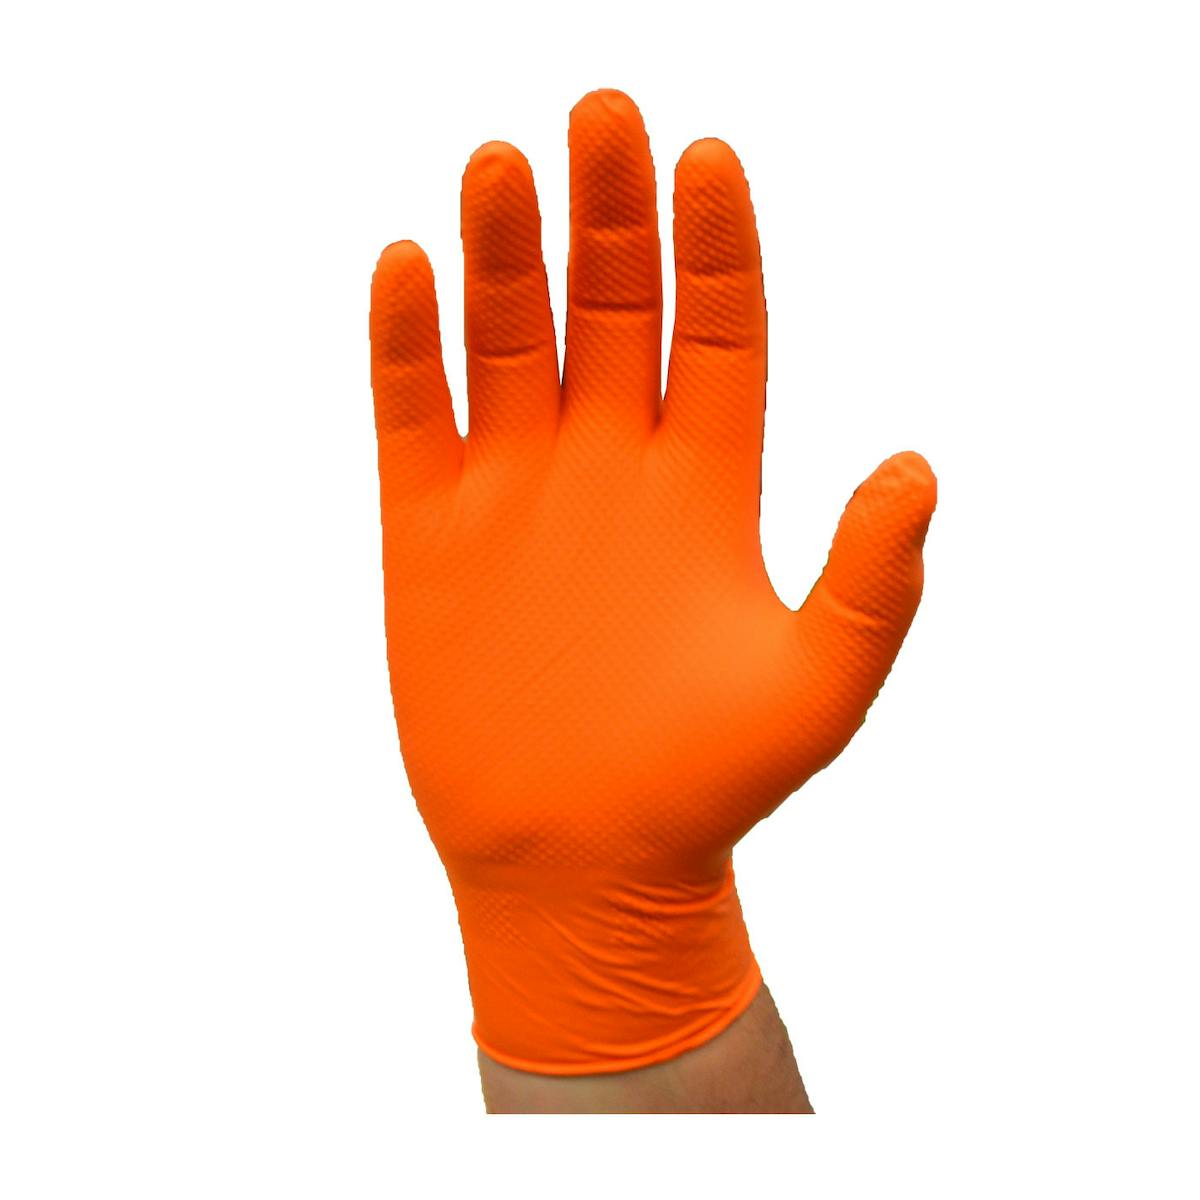 PosiShield™ Disposable Nitrile Glove, Powder Free with Textured Grip - 7 mil (2940)_1